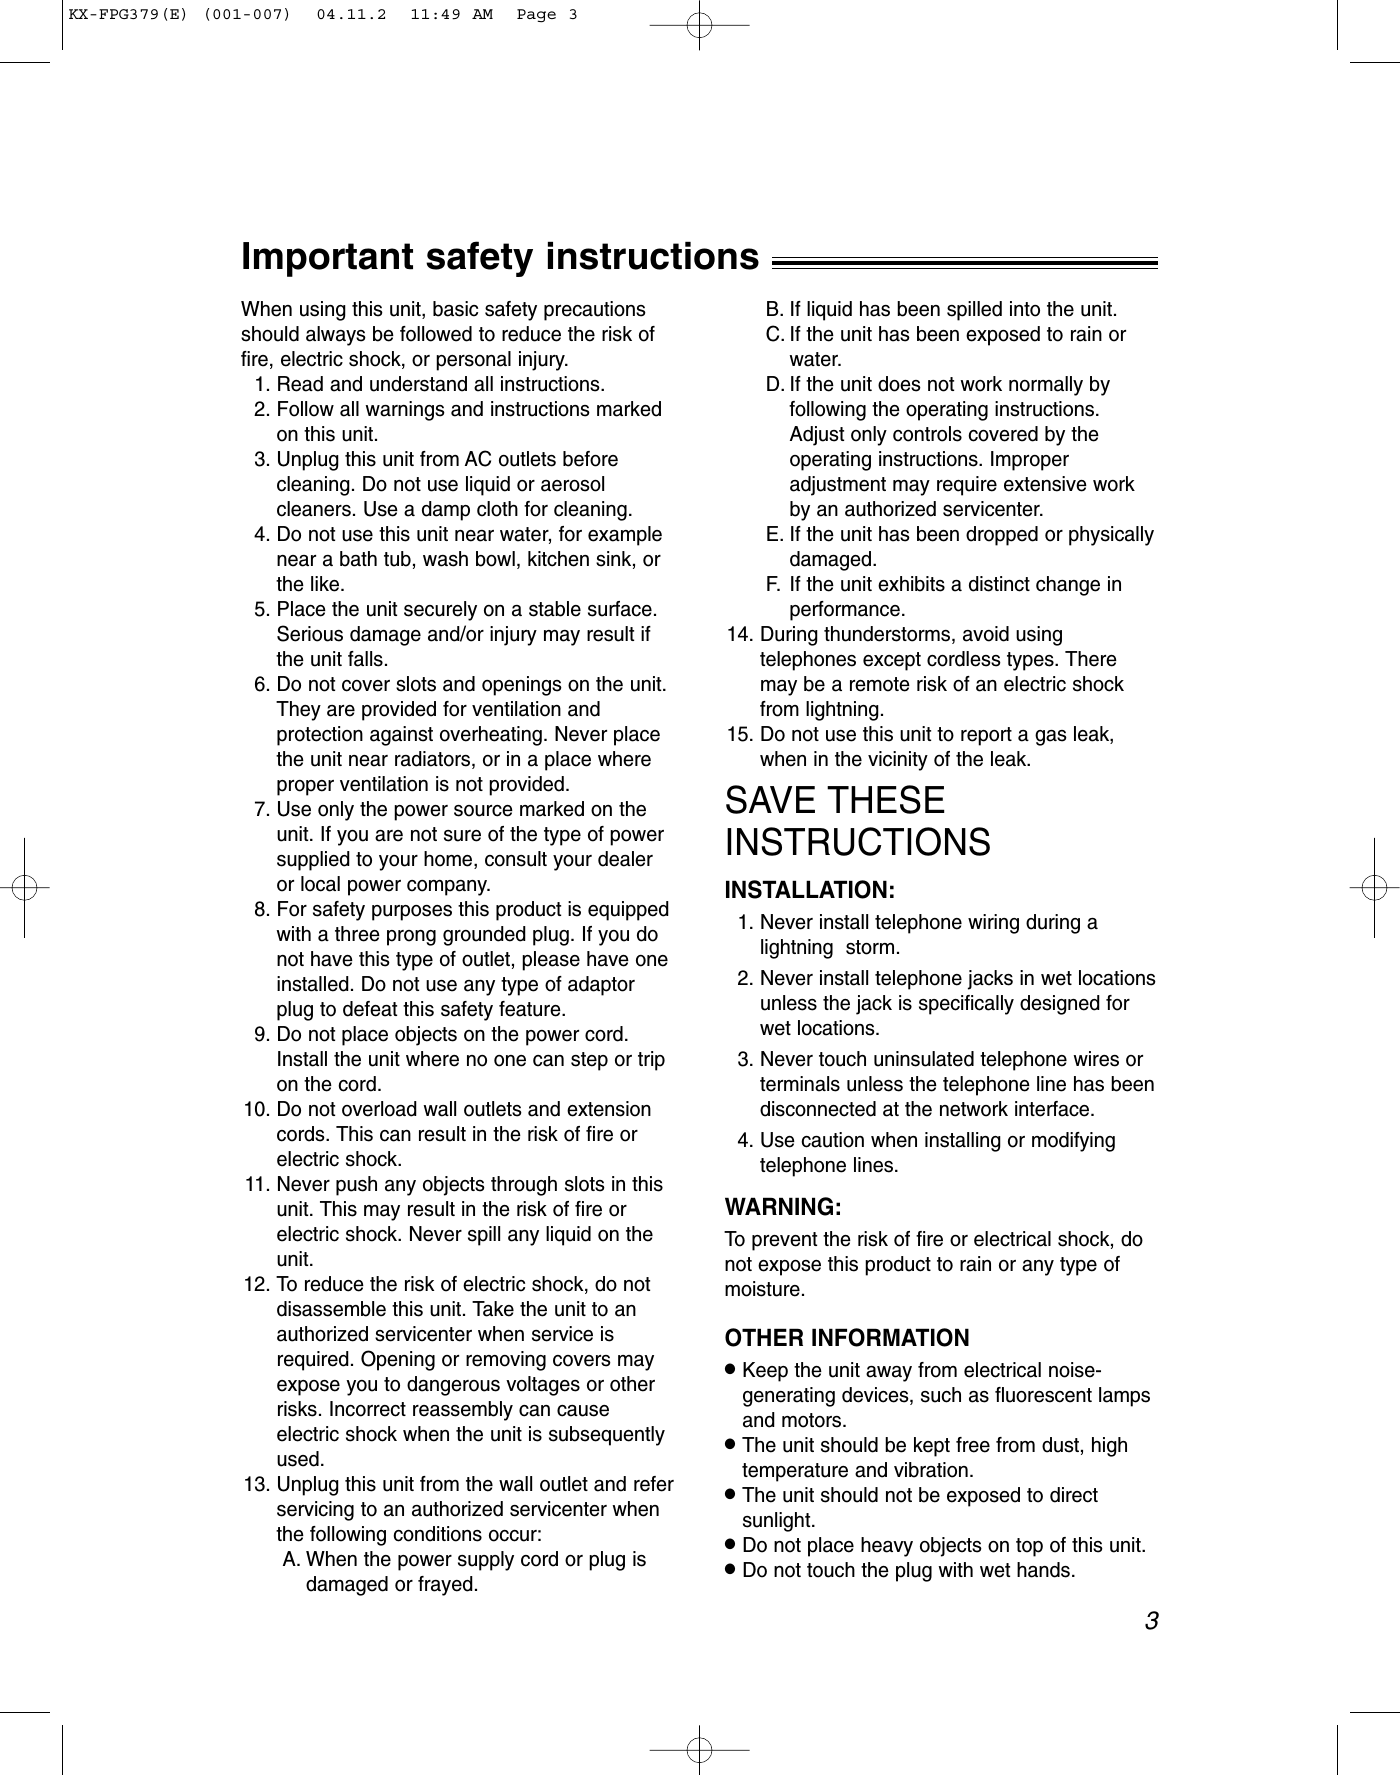 3Important safety instructions!When using this unit, basic safety precautionsshould always be followed to reduce the risk offire, electric shock, or personal injury.1. Read and understand all instructions.2. Follow all warnings and instructions markedon this unit.3. Unplug this unit from AC outlets beforecleaning. Do not use liquid or aerosolcleaners. Use a damp cloth for cleaning.4. Do not use this unit near water, for examplenear a bath tub, wash bowl, kitchen sink, orthe like.5. Place the unit securely on a stable surface.Serious damage and/or injury may result ifthe unit falls.6. Do not cover slots and openings on the unit.They are provided for ventilation andprotection against overheating. Never placethe unit near radiators, or in a place whereproper ventilation is not provided.7. Use only the power source marked on theunit. If you are not sure of the type of powersupplied to your home, consult your dealeror local power company.8. For safety purposes this product is equippedwith a three prong grounded plug. If you donot have this type of outlet, please have oneinstalled. Do not use any type of adaptorplug to defeat this safety feature.9. Do not place objects on the power cord.Install the unit where no one can step or tripon the cord.10. Do not overload wall outlets and extensioncords. This can result in the risk of fire orelectric shock.11. Never push any objects through slots in thisunit. This may result in the risk of fire orelectric shock. Never spill any liquid on theunit.12. To reduce the risk of electric shock, do notdisassemble this unit. Take the unit to anauthorized servicenter when service isrequired. Opening or removing covers mayexpose you to dangerous voltages or otherrisks. Incorrect reassembly can causeelectric shock when the unit is subsequentlyused.13. Unplug this unit from the wall outlet and referservicing to an authorized servicenter whenthe following conditions occur:A. When the power supply cord or plug isdamaged or frayed.B. If liquid has been spilled into the unit.C. If the unit has been exposed to rain orwater.D. If the unit does not work normally byfollowing the operating instructions.Adjust only controls covered by theoperating instructions. Improperadjustment may require extensive workby an authorized servicenter.E. If the unit has been dropped or physicallydamaged.F. If the unit exhibits a distinct change inperformance.14. During thunderstorms, avoid usingtelephones except cordless types. Theremay be a remote risk of an electric shockfrom lightning.15. Do not use this unit to report a gas leak,when in the vicinity of the leak.SAVE THESEINSTRUCTIONSINSTALLATION:1. Never install telephone wiring during alightning  storm.2. Never install telephone jacks in wet locationsunless the jack is specifically designed forwet locations. 3. Never touch uninsulated telephone wires orterminals unless the telephone line has beendisconnected at the network interface.4. Use caution when installing or modifyingtelephone lines.WARNING:To prevent the risk of fire or electrical shock, donot expose this product to rain or any type ofmoisture.OTHER INFORMATION●Keep the unit away from electrical noise-generating devices, such as fluorescent lampsand motors.●The unit should be kept free from dust, hightemperature and vibration.●The unit should not be exposed to directsunlight.●Do not place heavy objects on top of this unit.●Do not touch the plug with wet hands.KX-FPG379(E) (001-007)  04.11.2  11:49 AM  Page 3